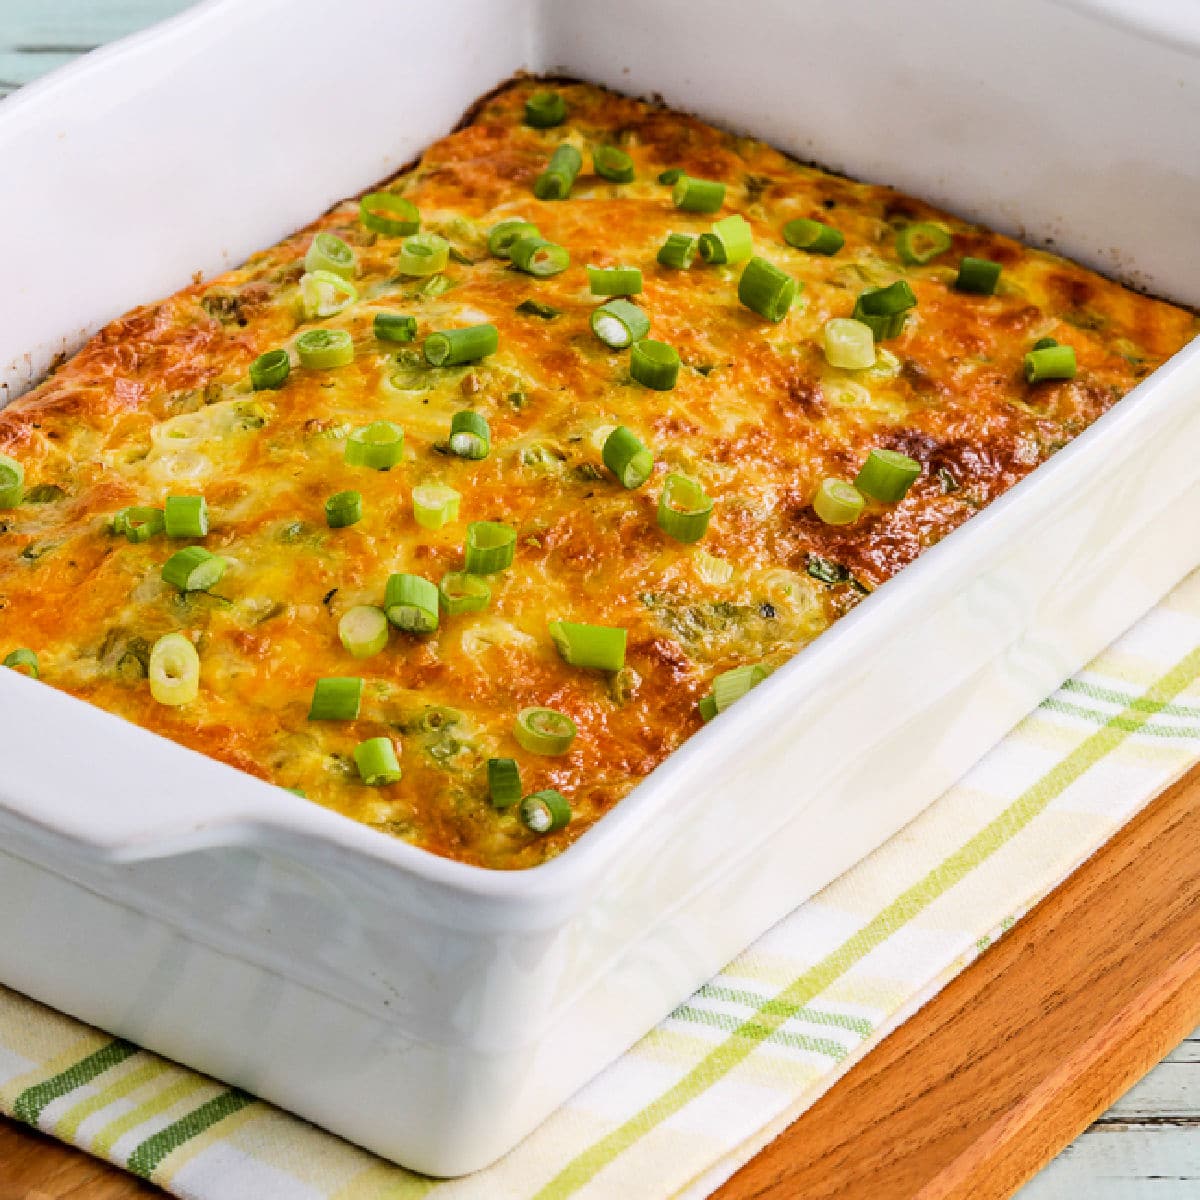 Square image of Cheesy Green Chile Breakfast Casserole shown in baking dish.